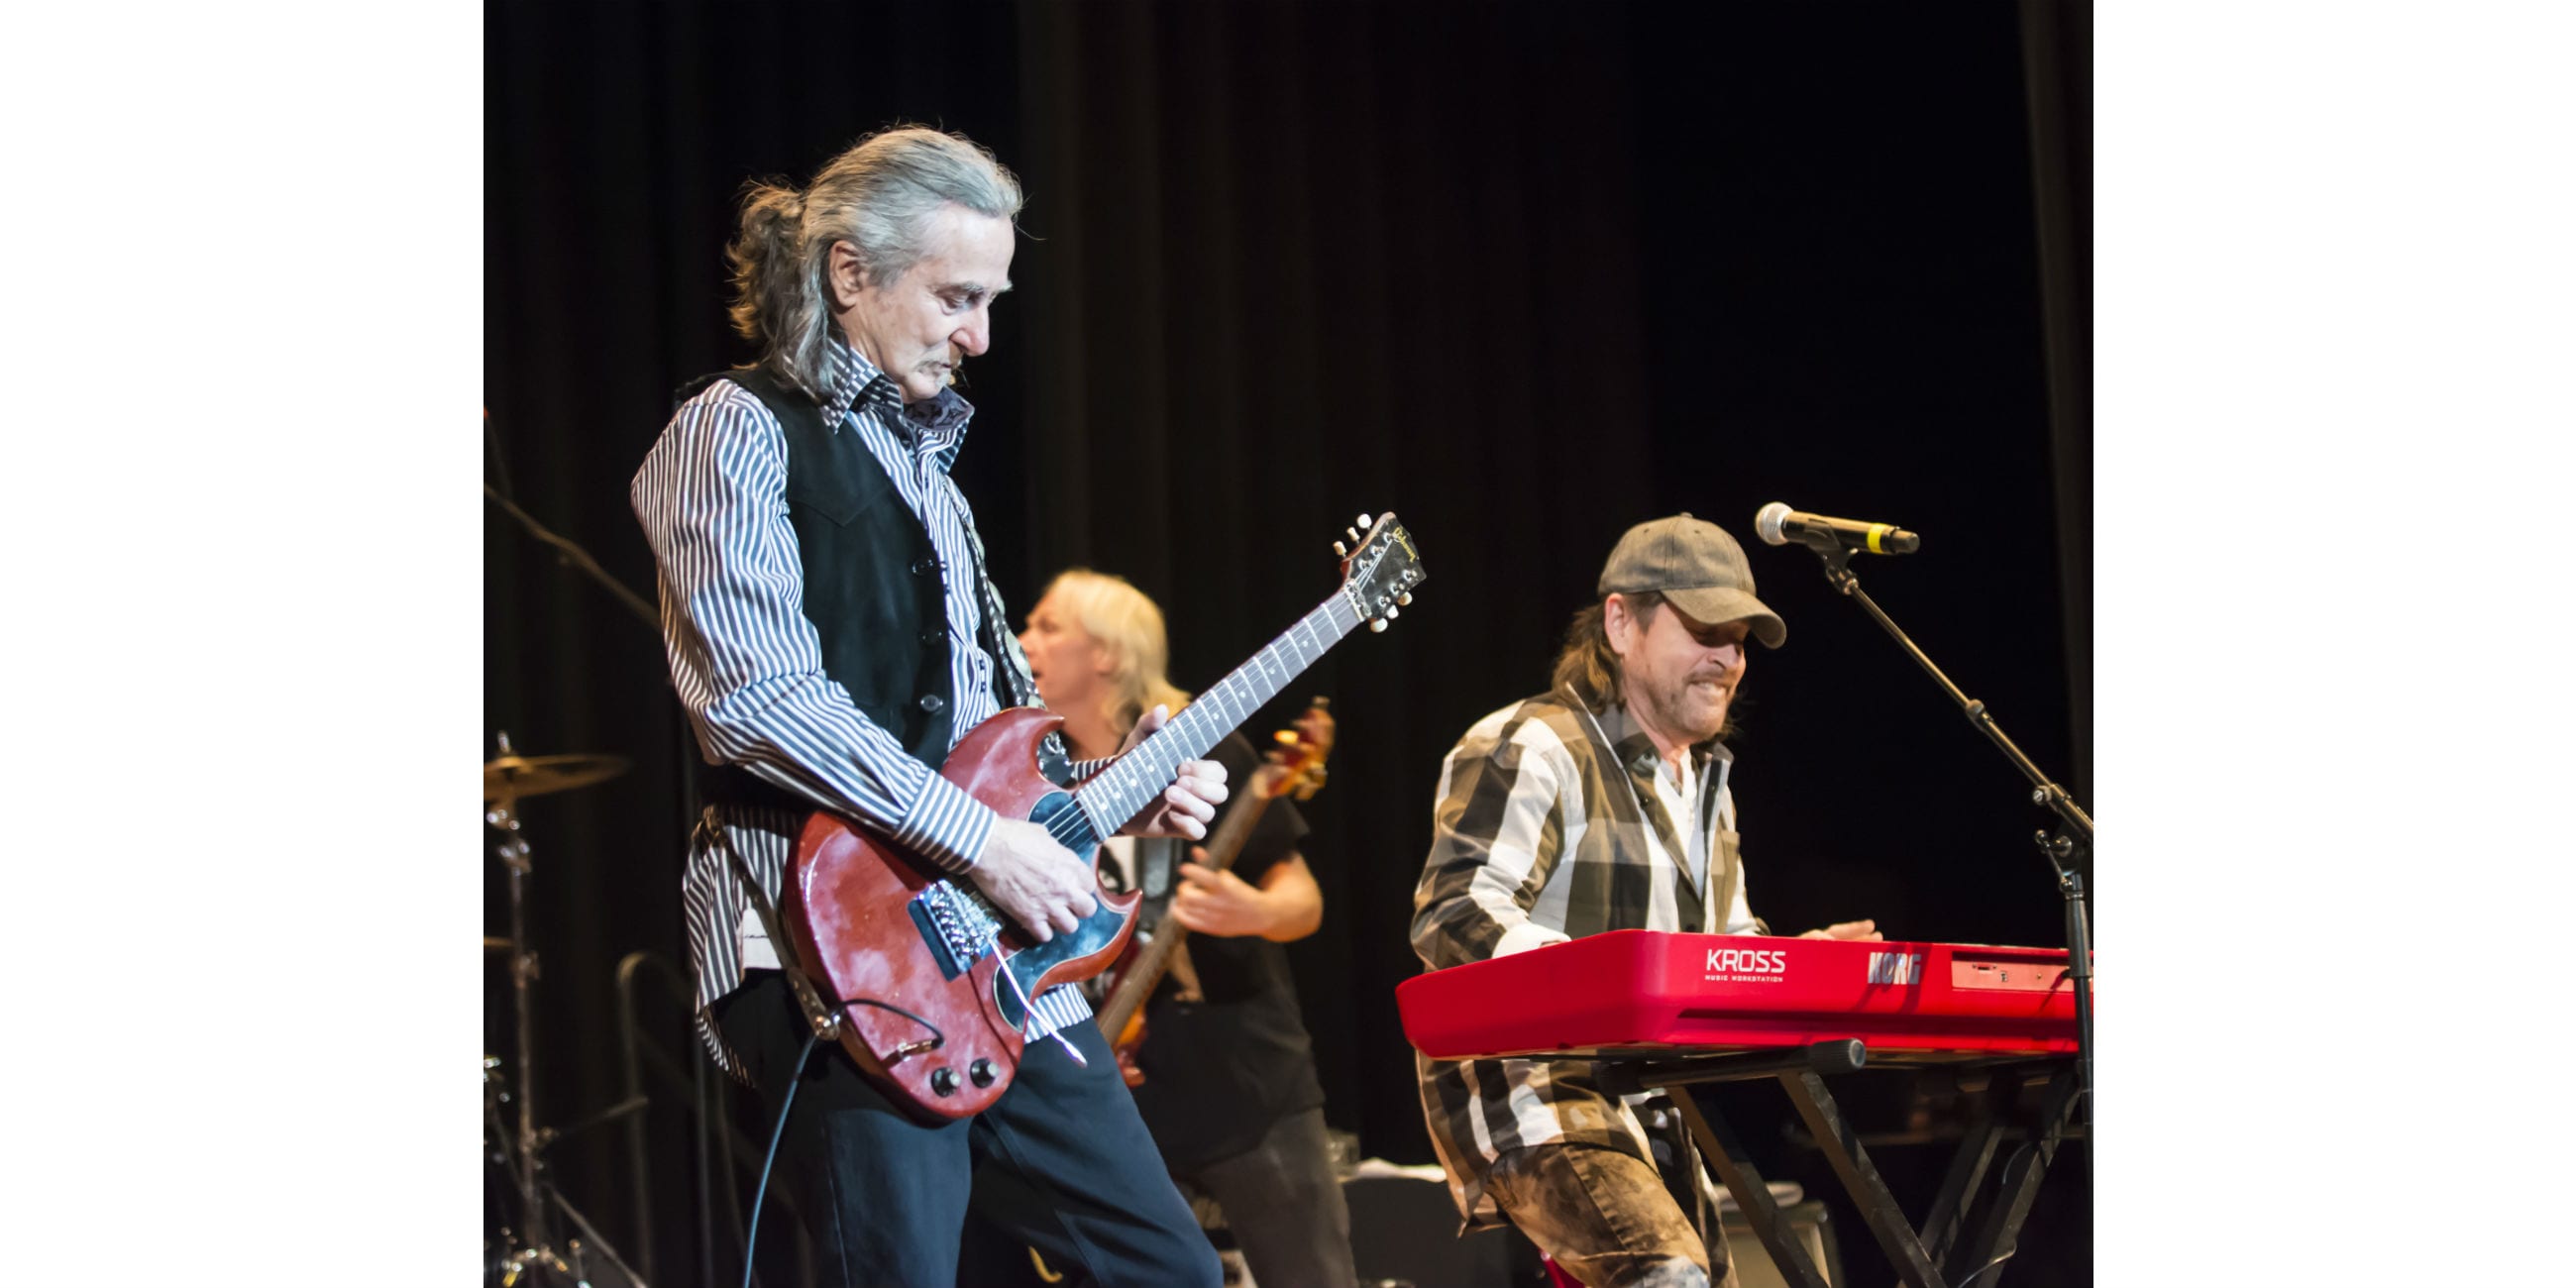 Brian Maes on the keyboard with guitarist Barry Goudreau in concert at Lynn City Hall auditorium.